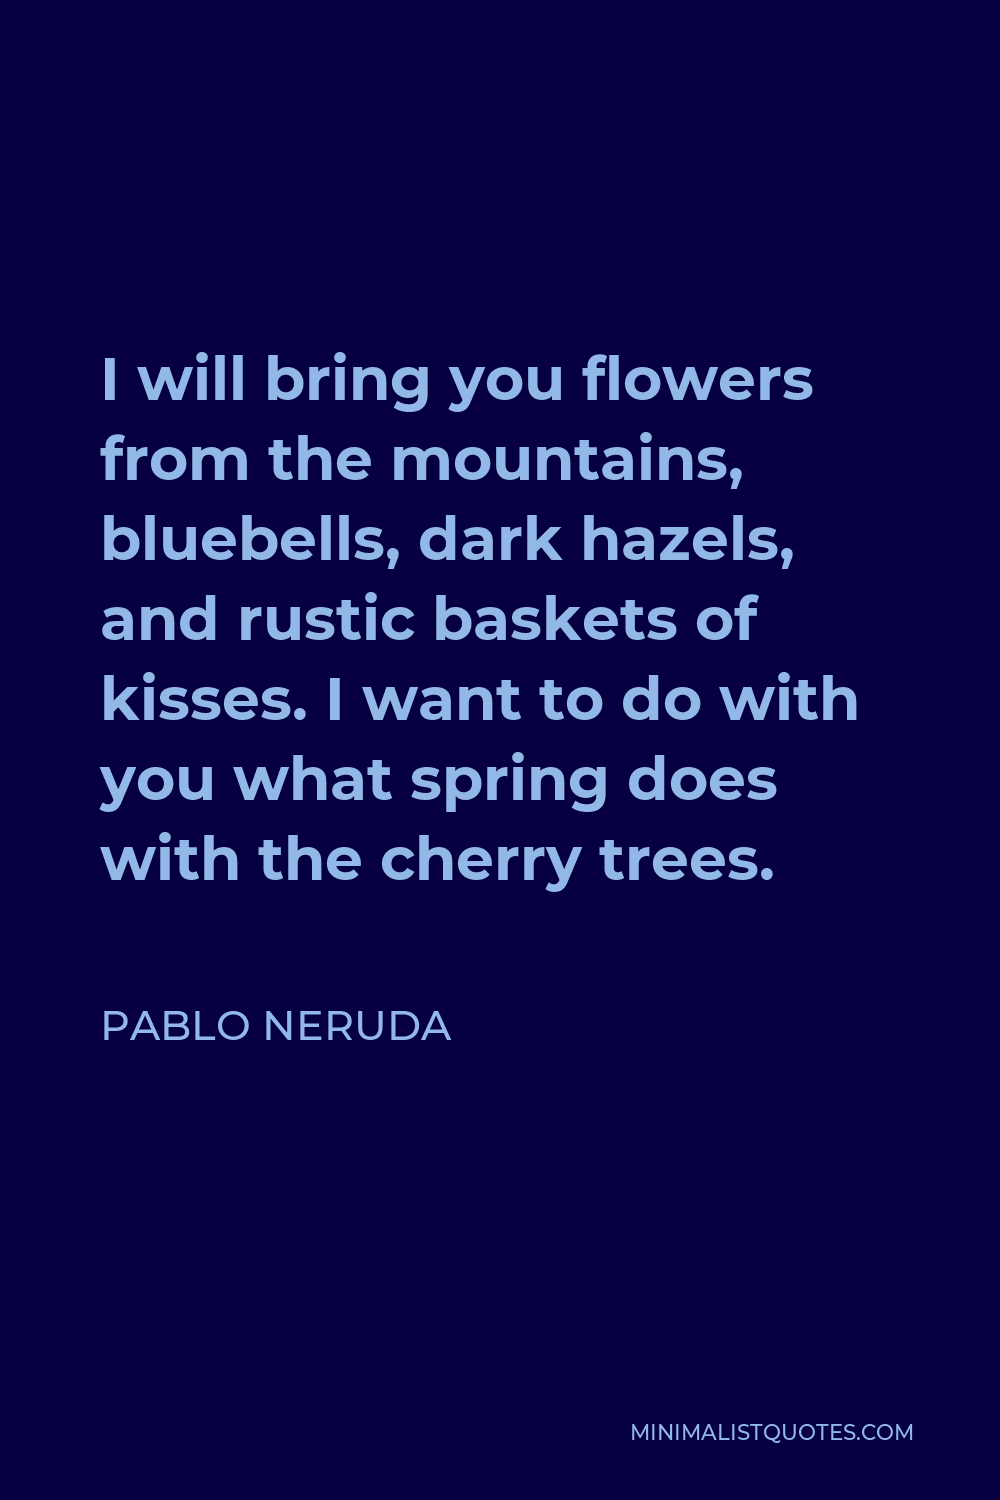 Pablo Neruda Quote - I will bring you flowers from the mountains, bluebells, dark hazels, and rustic baskets of kisses. I want to do with you what spring does with the cherry trees.